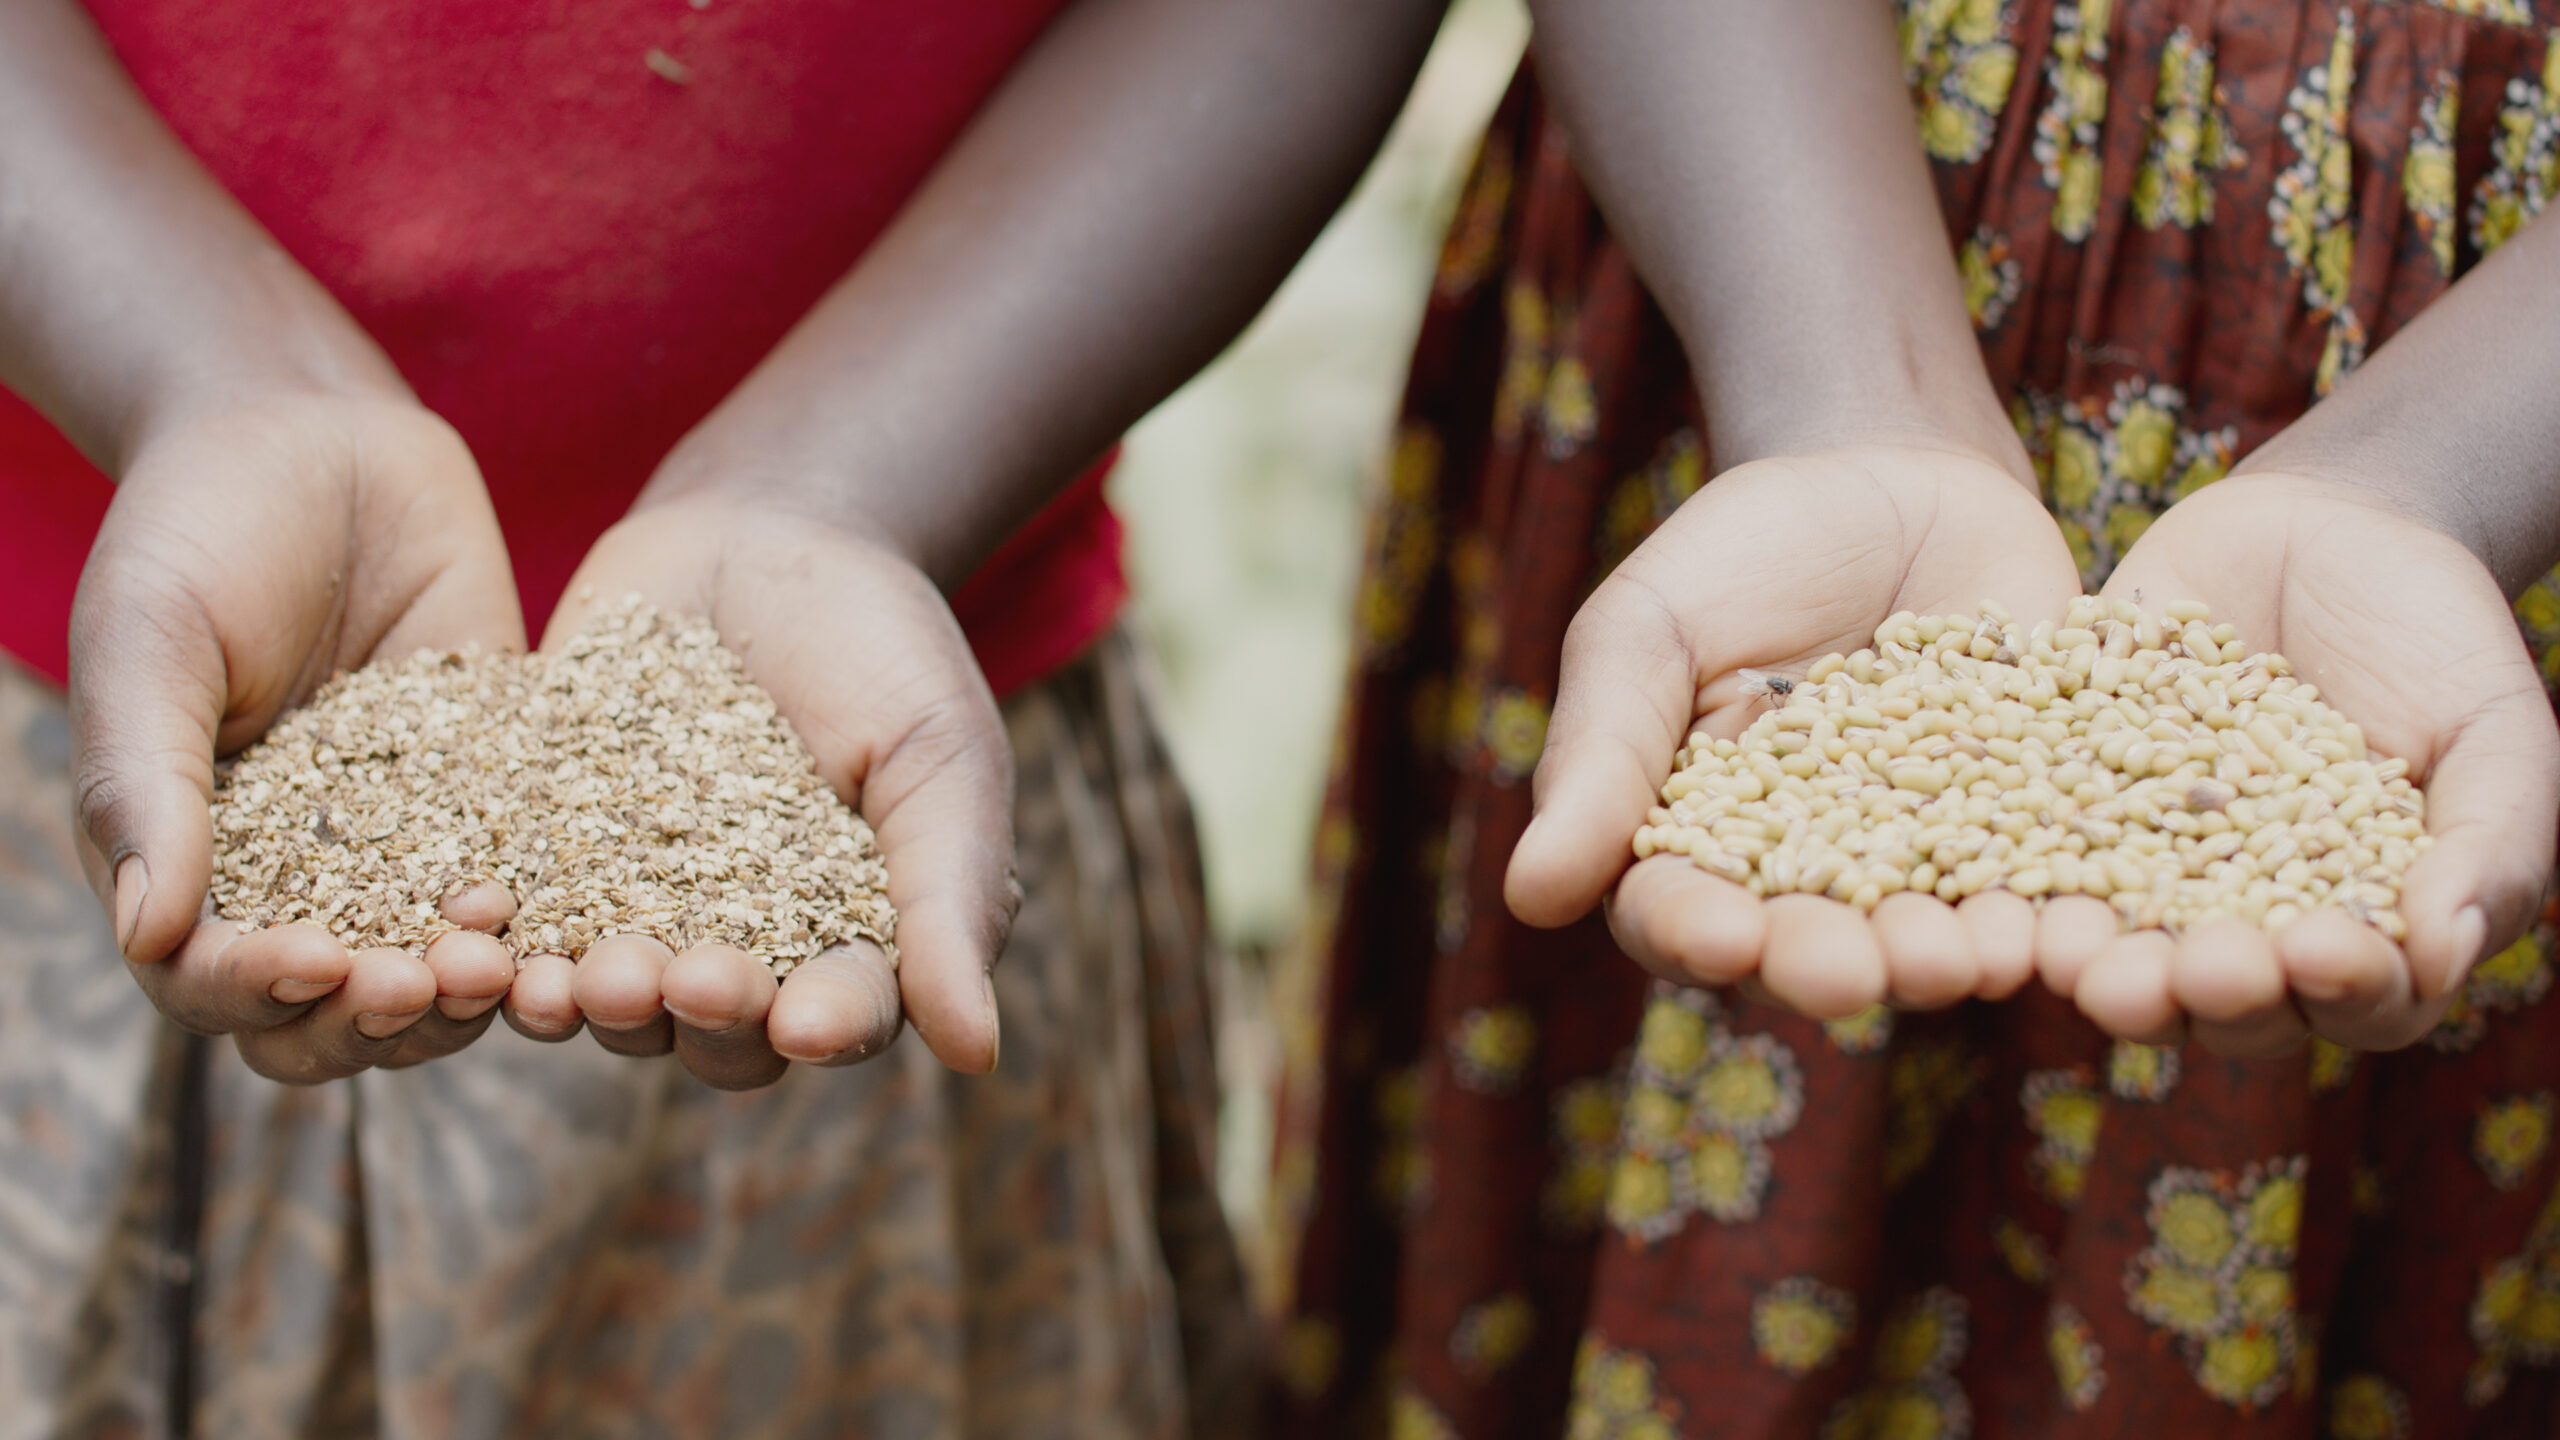 Two children hold handfuls of grains.